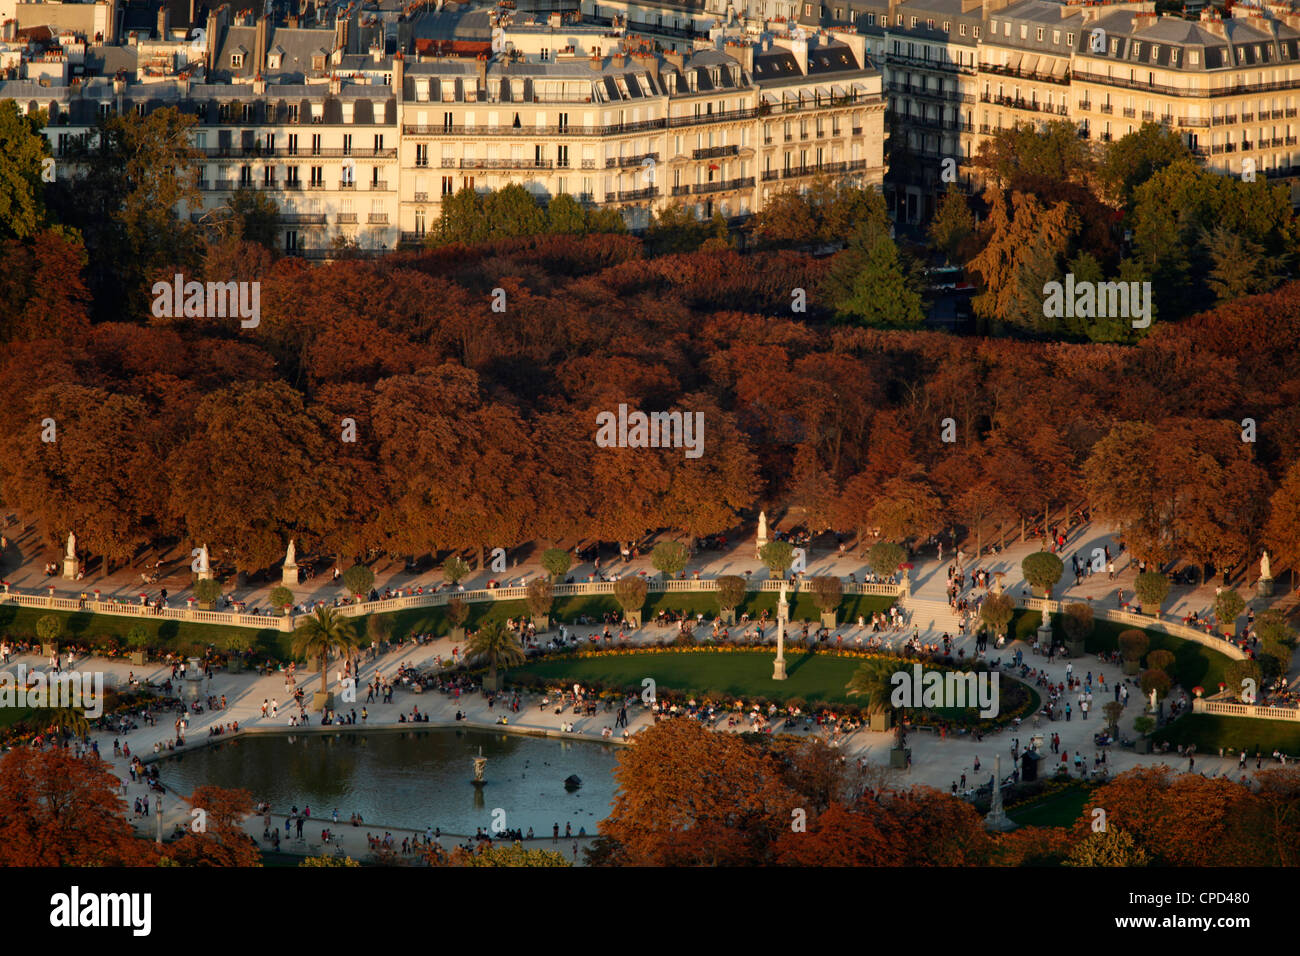 Aerial view of the Luxembourg garden, Paris, France, Europe Stock Photo